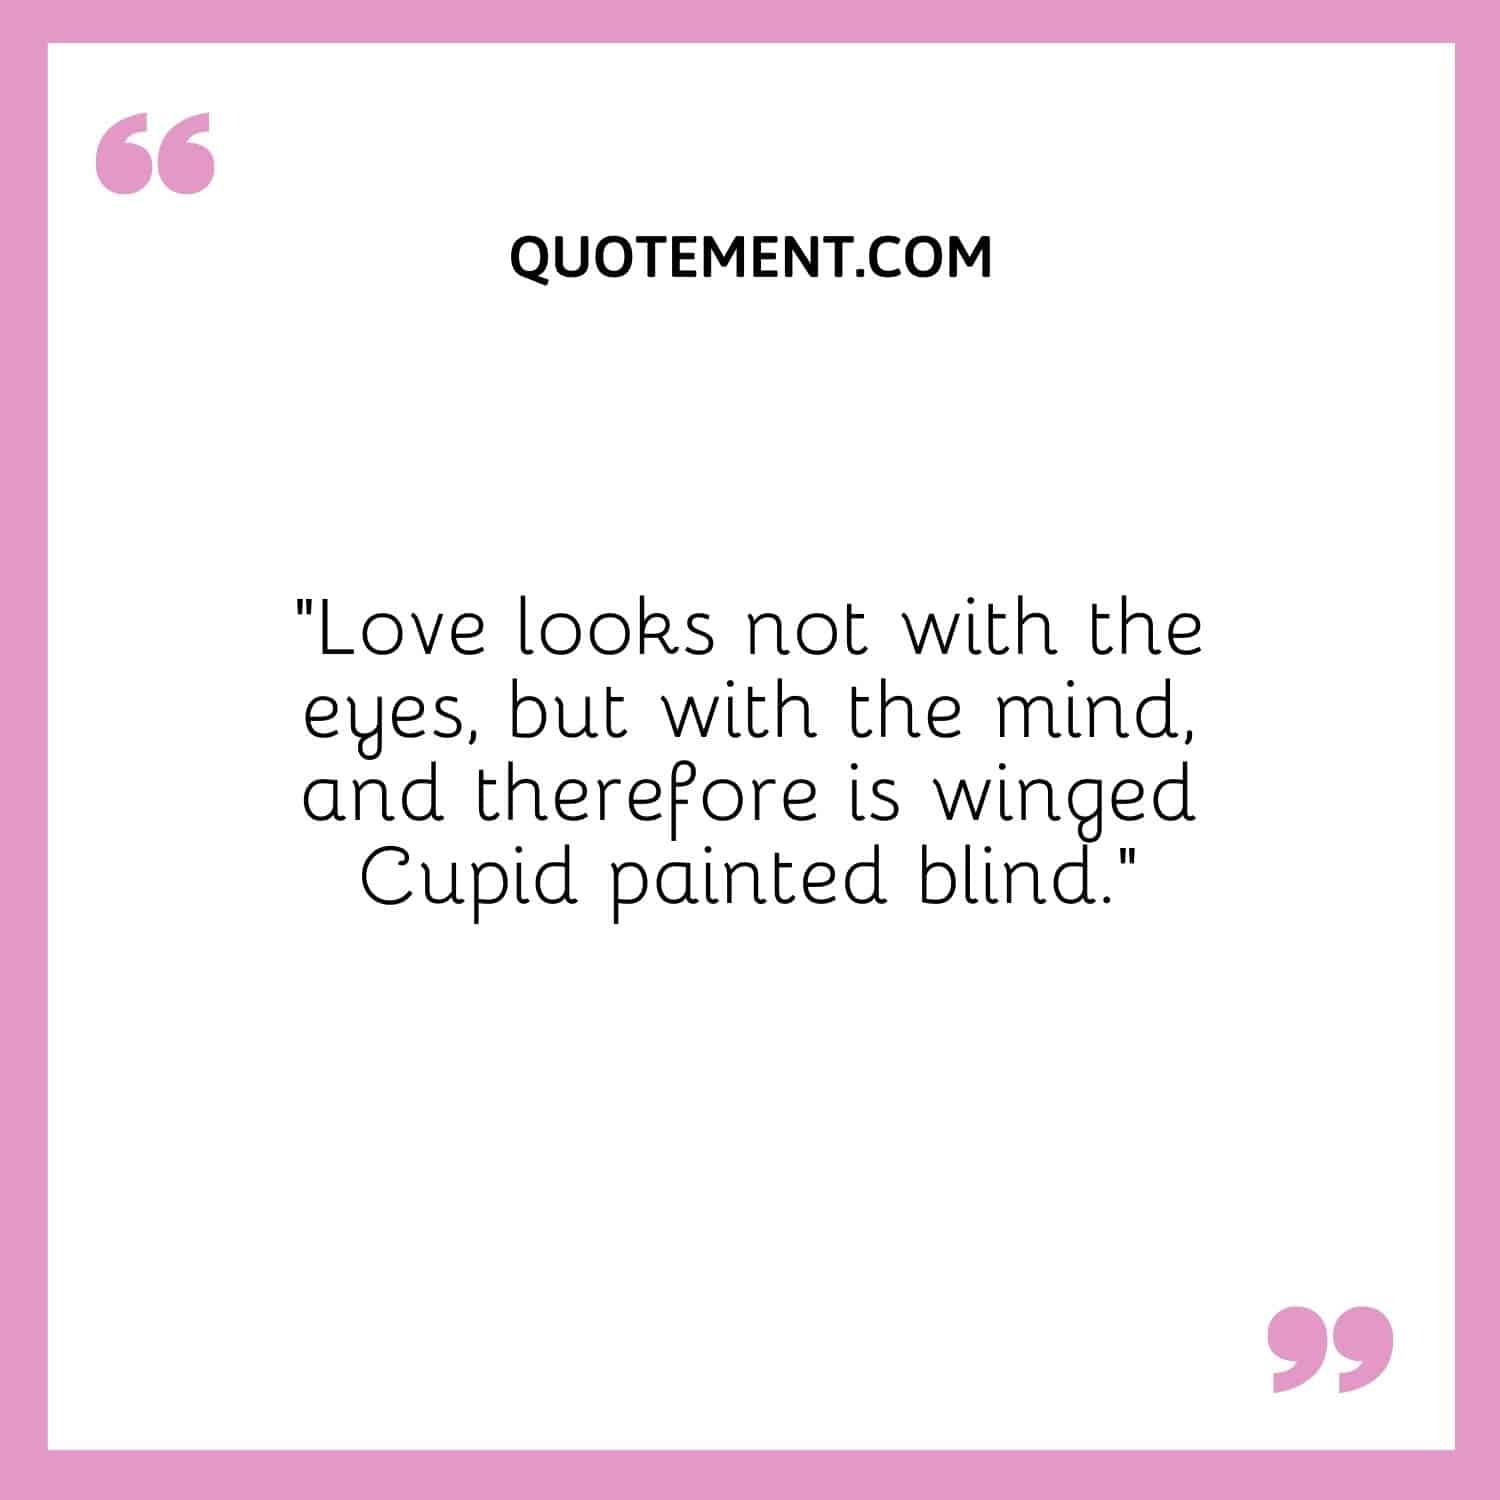 Love looks not with the eyes, but with the mind, and therefore is winged Cupid painted blind.